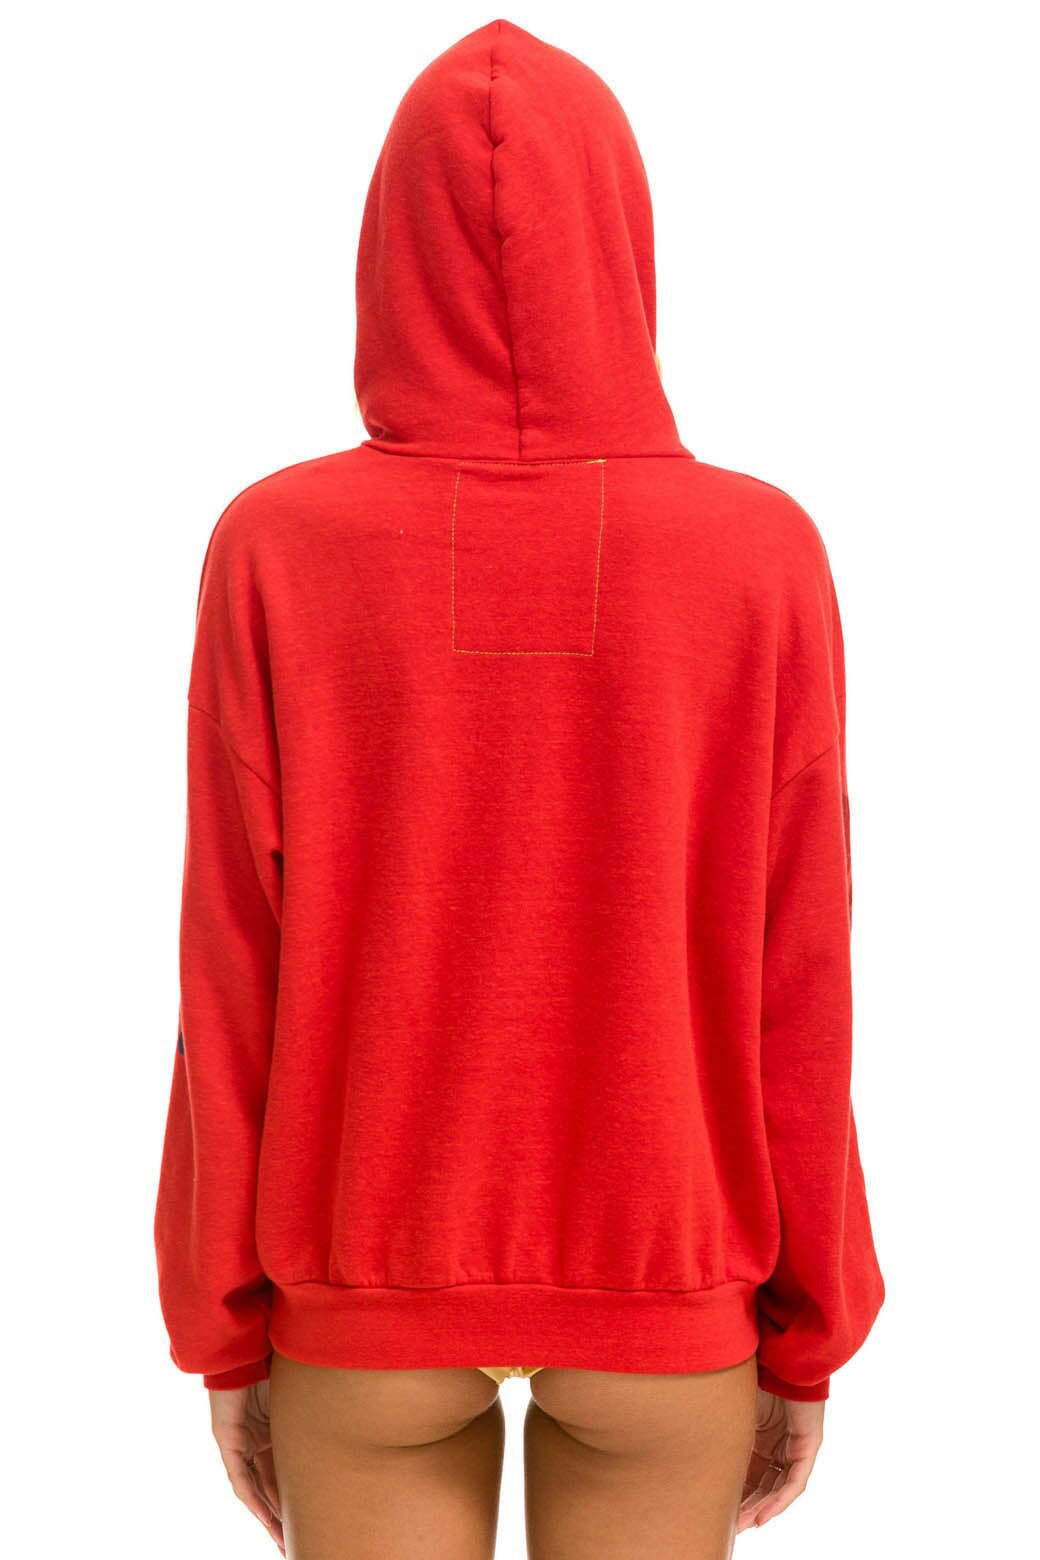 AVIATOR NATION SAN FRANCISCO RELAXED PULLOVER HOODIE - RED Hoodie Aviator Nation 